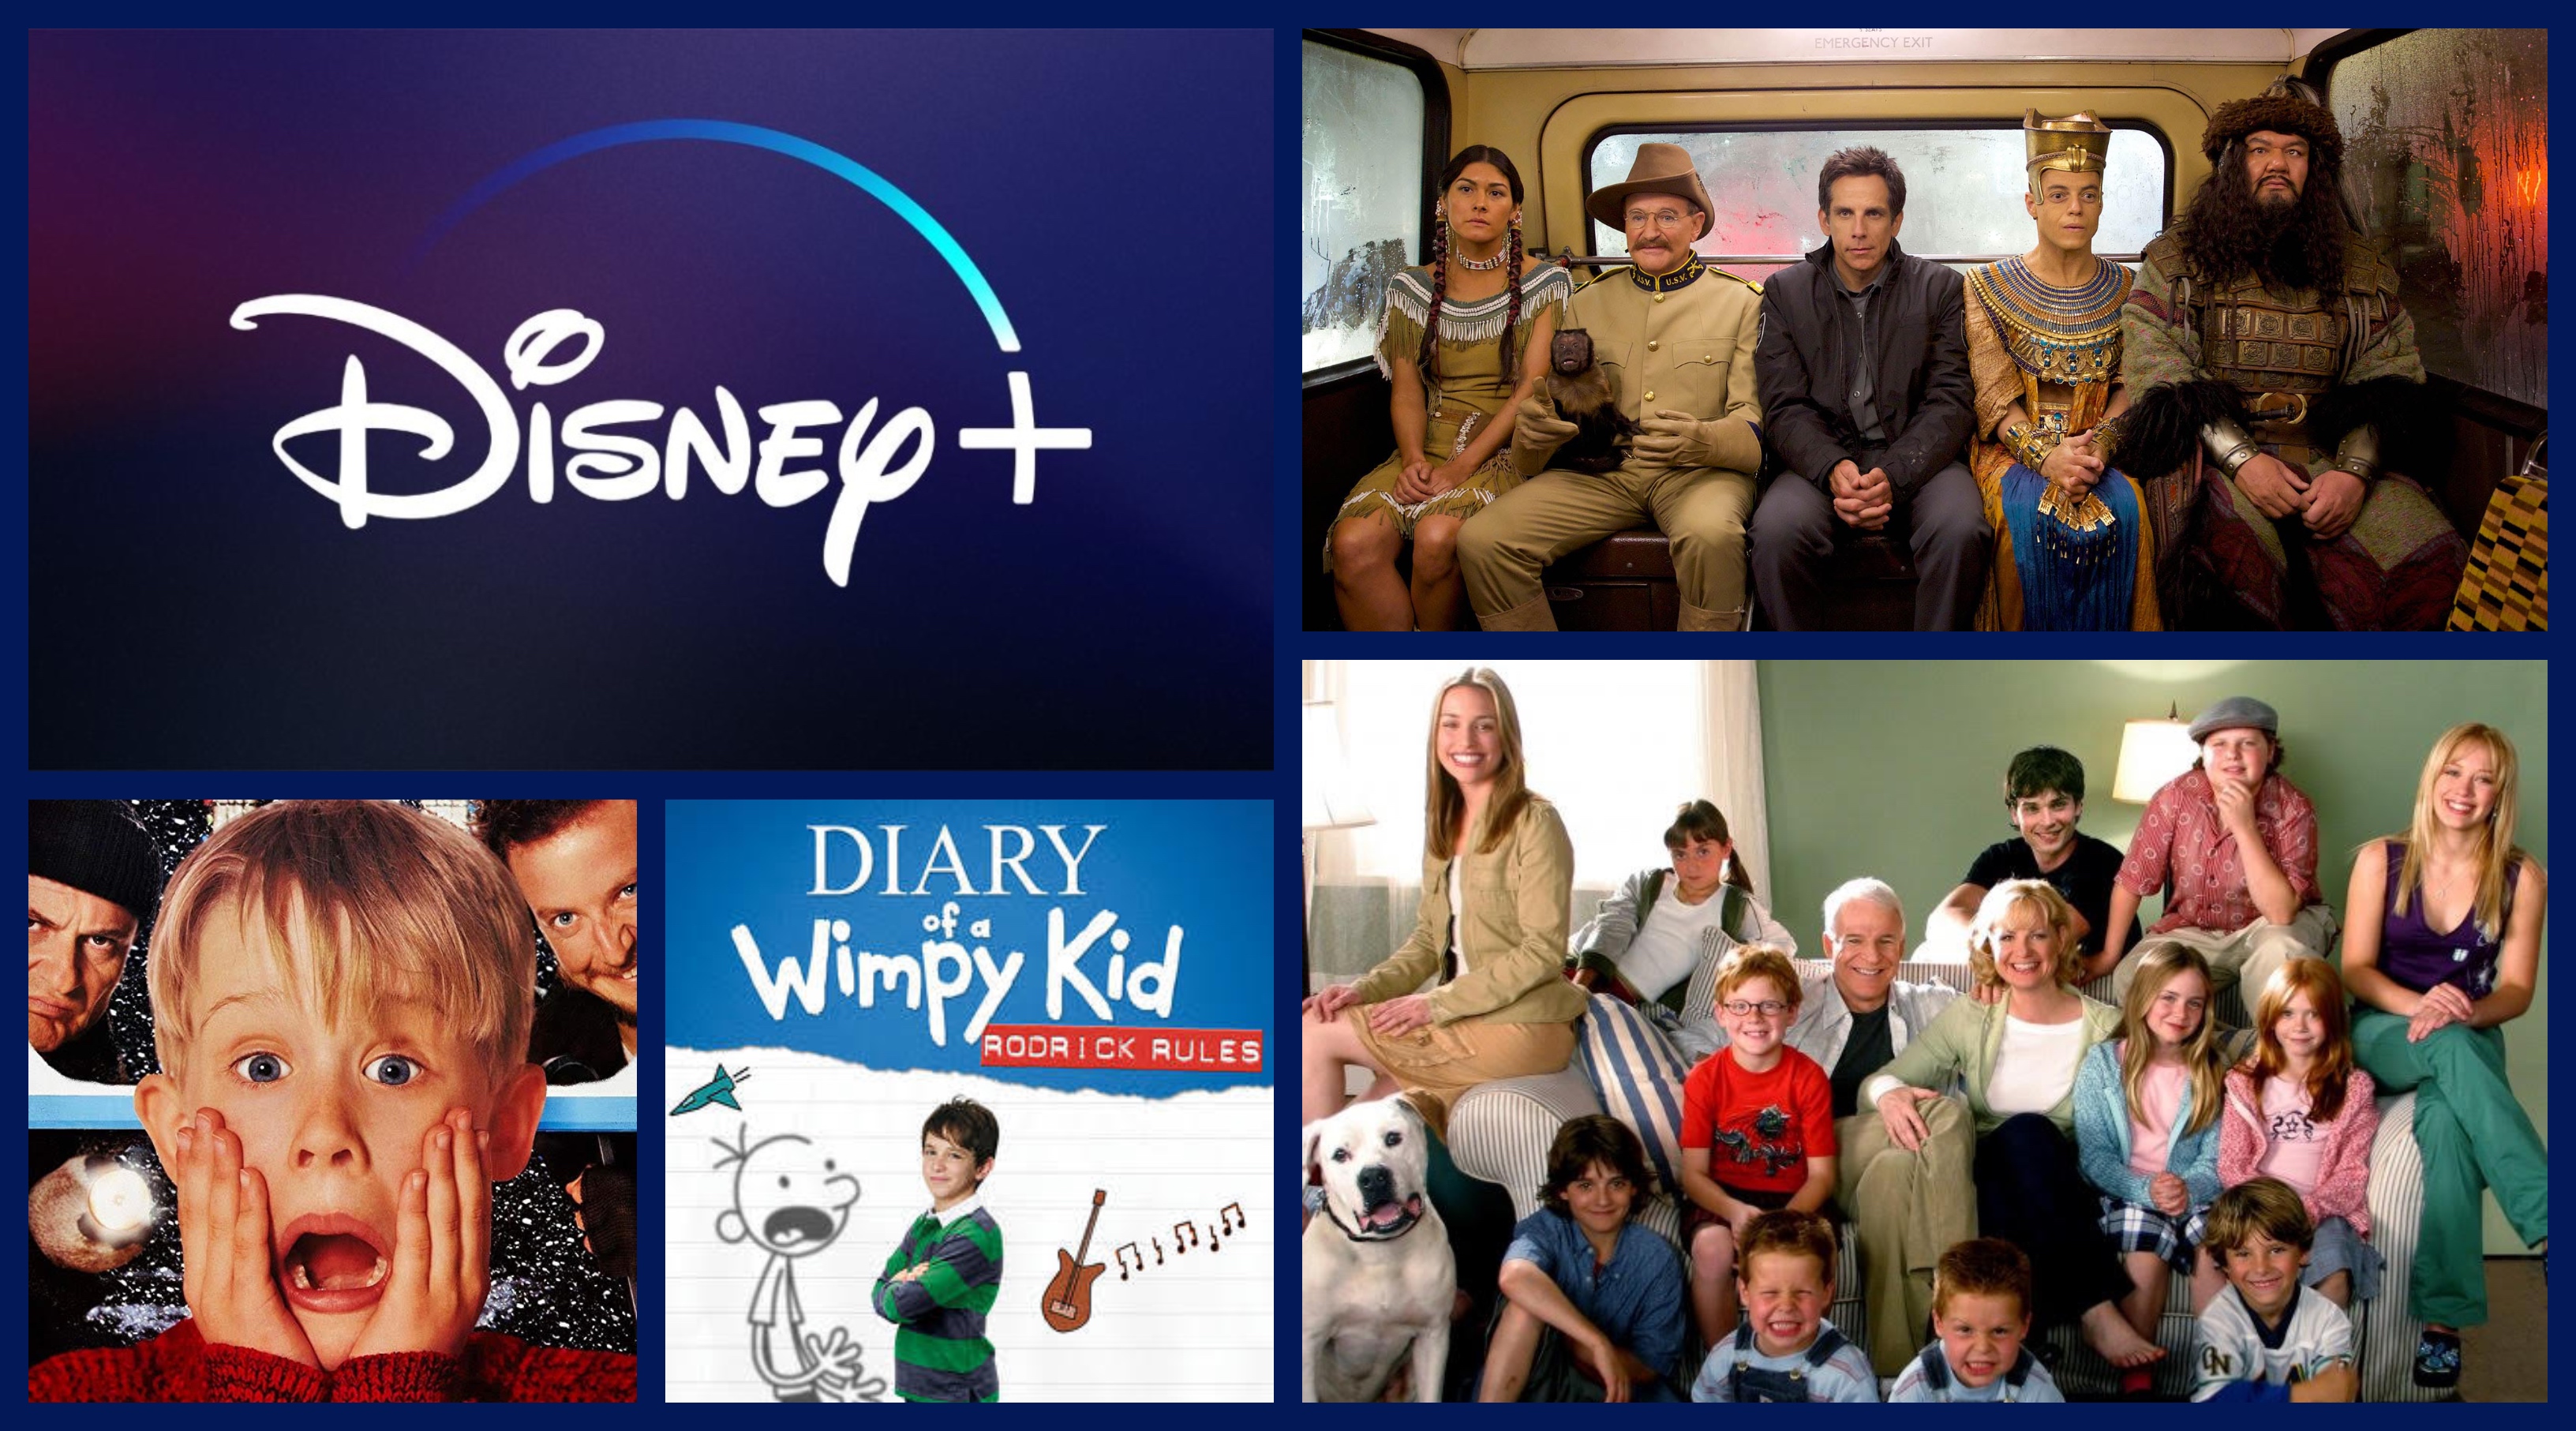 Disney Rebooting Fox Titles such as ‘Home Alone’ and ‘Night at the Museum’ for Disney+